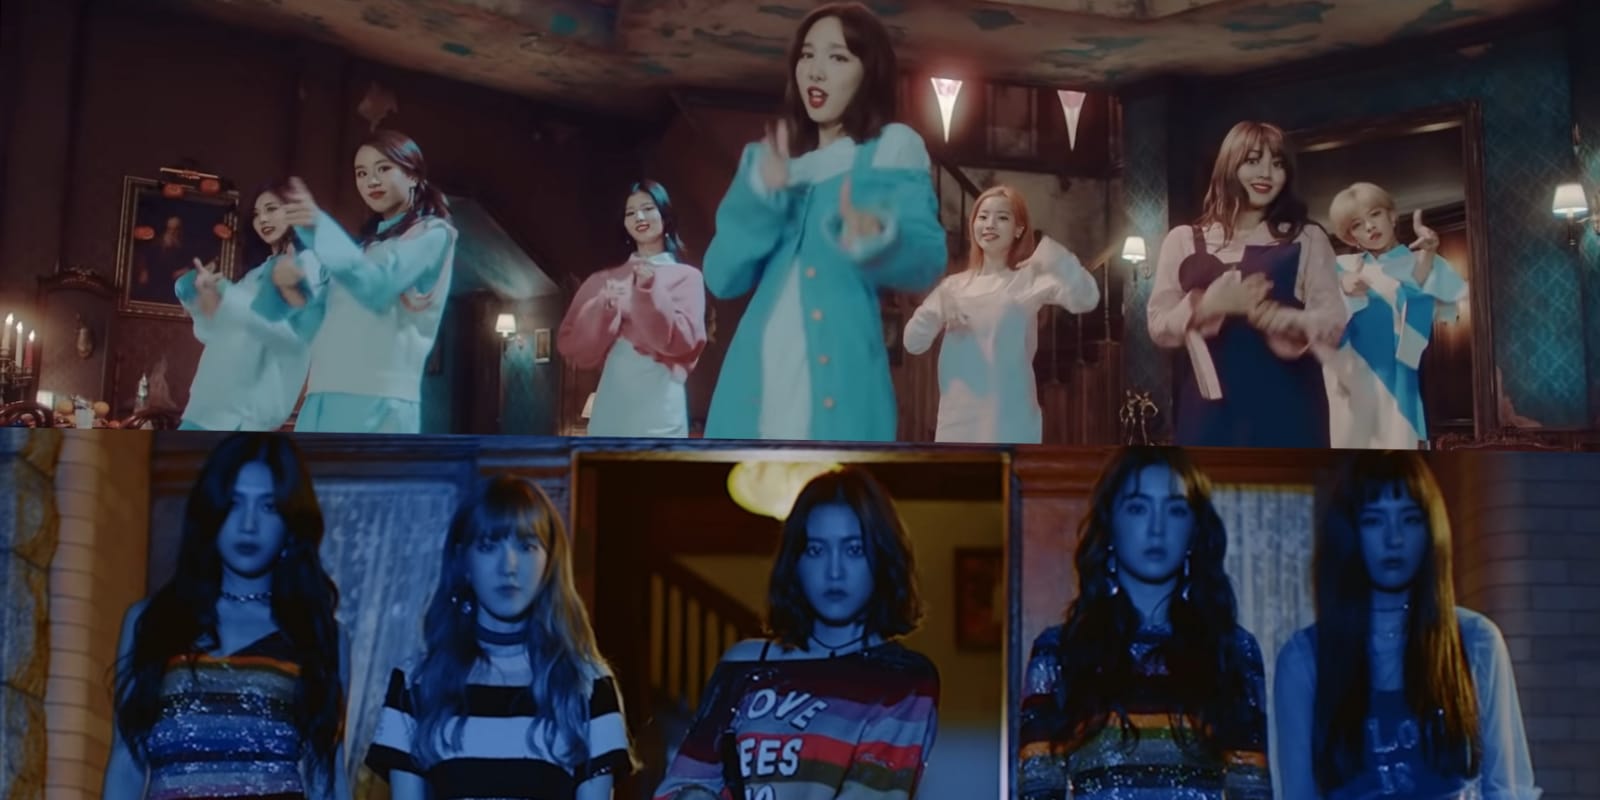 The End of October is Getting Closer, Here's a Horror-Themed K-Pop Music Video You Can Watch to Welcome Halloween!